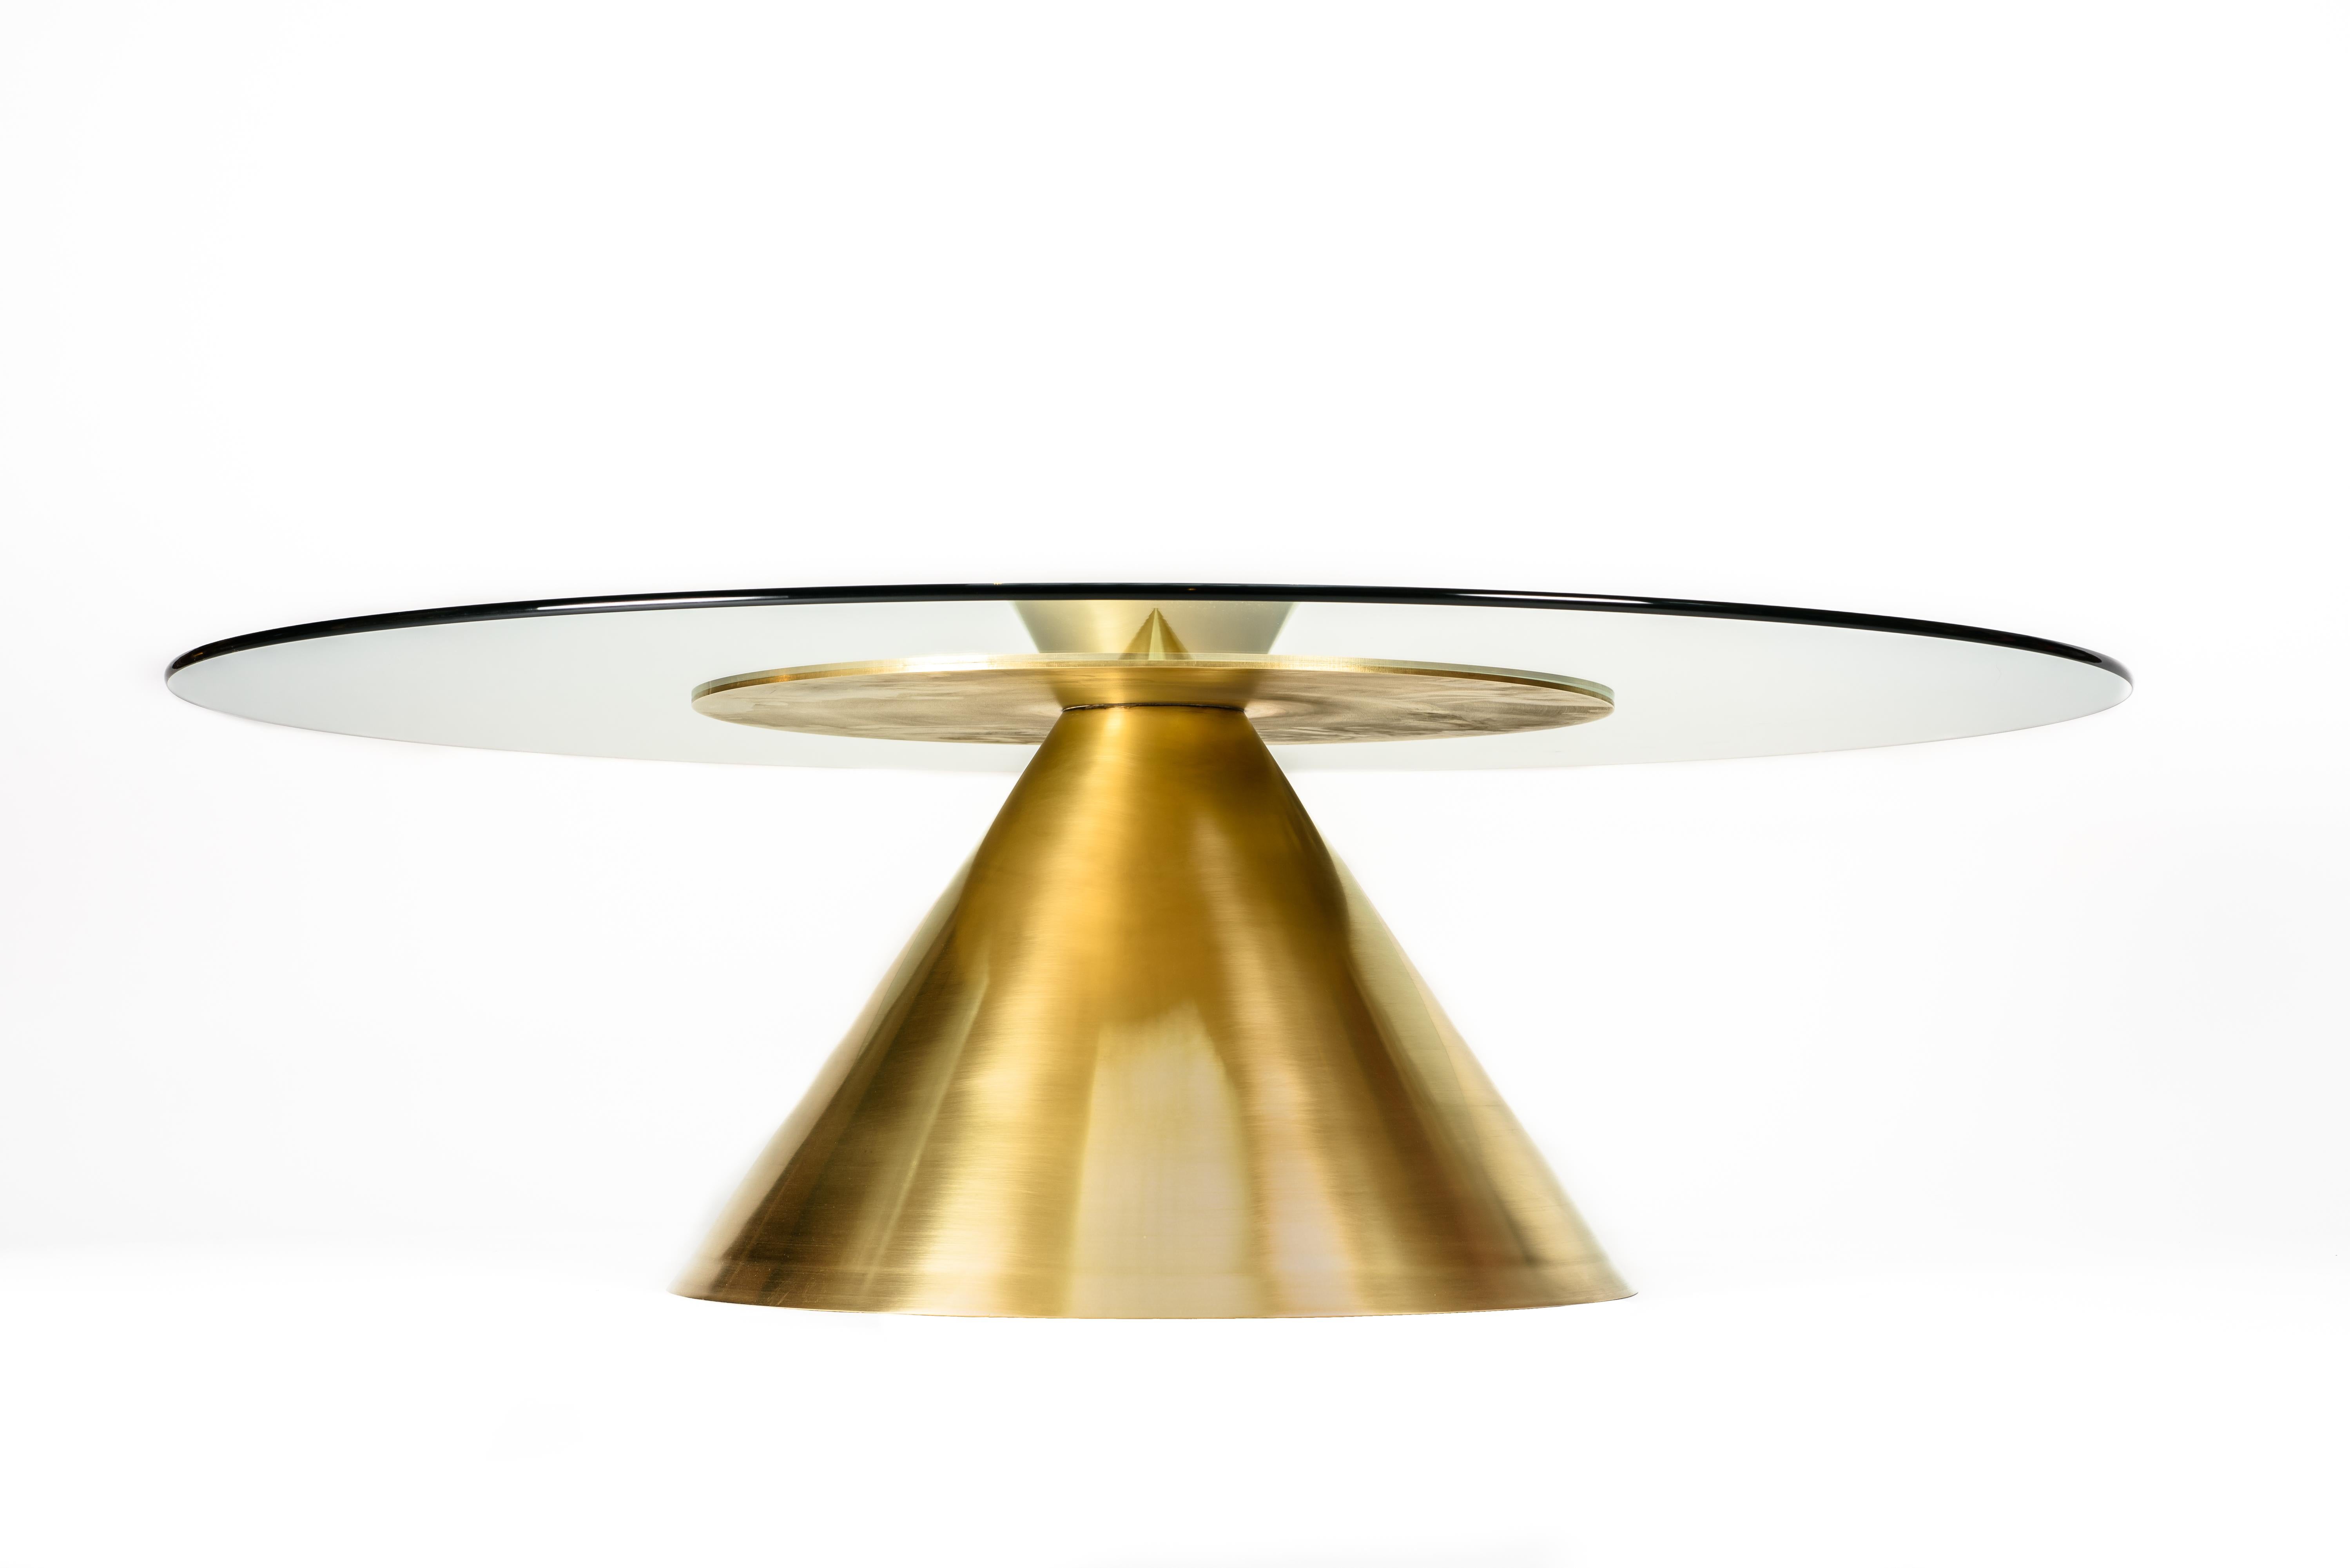 XL Halo Coffee Table w/ Polished Spun Bronze Base and Tempered Glass Top In New Condition For Sale In Brooklyn, NY